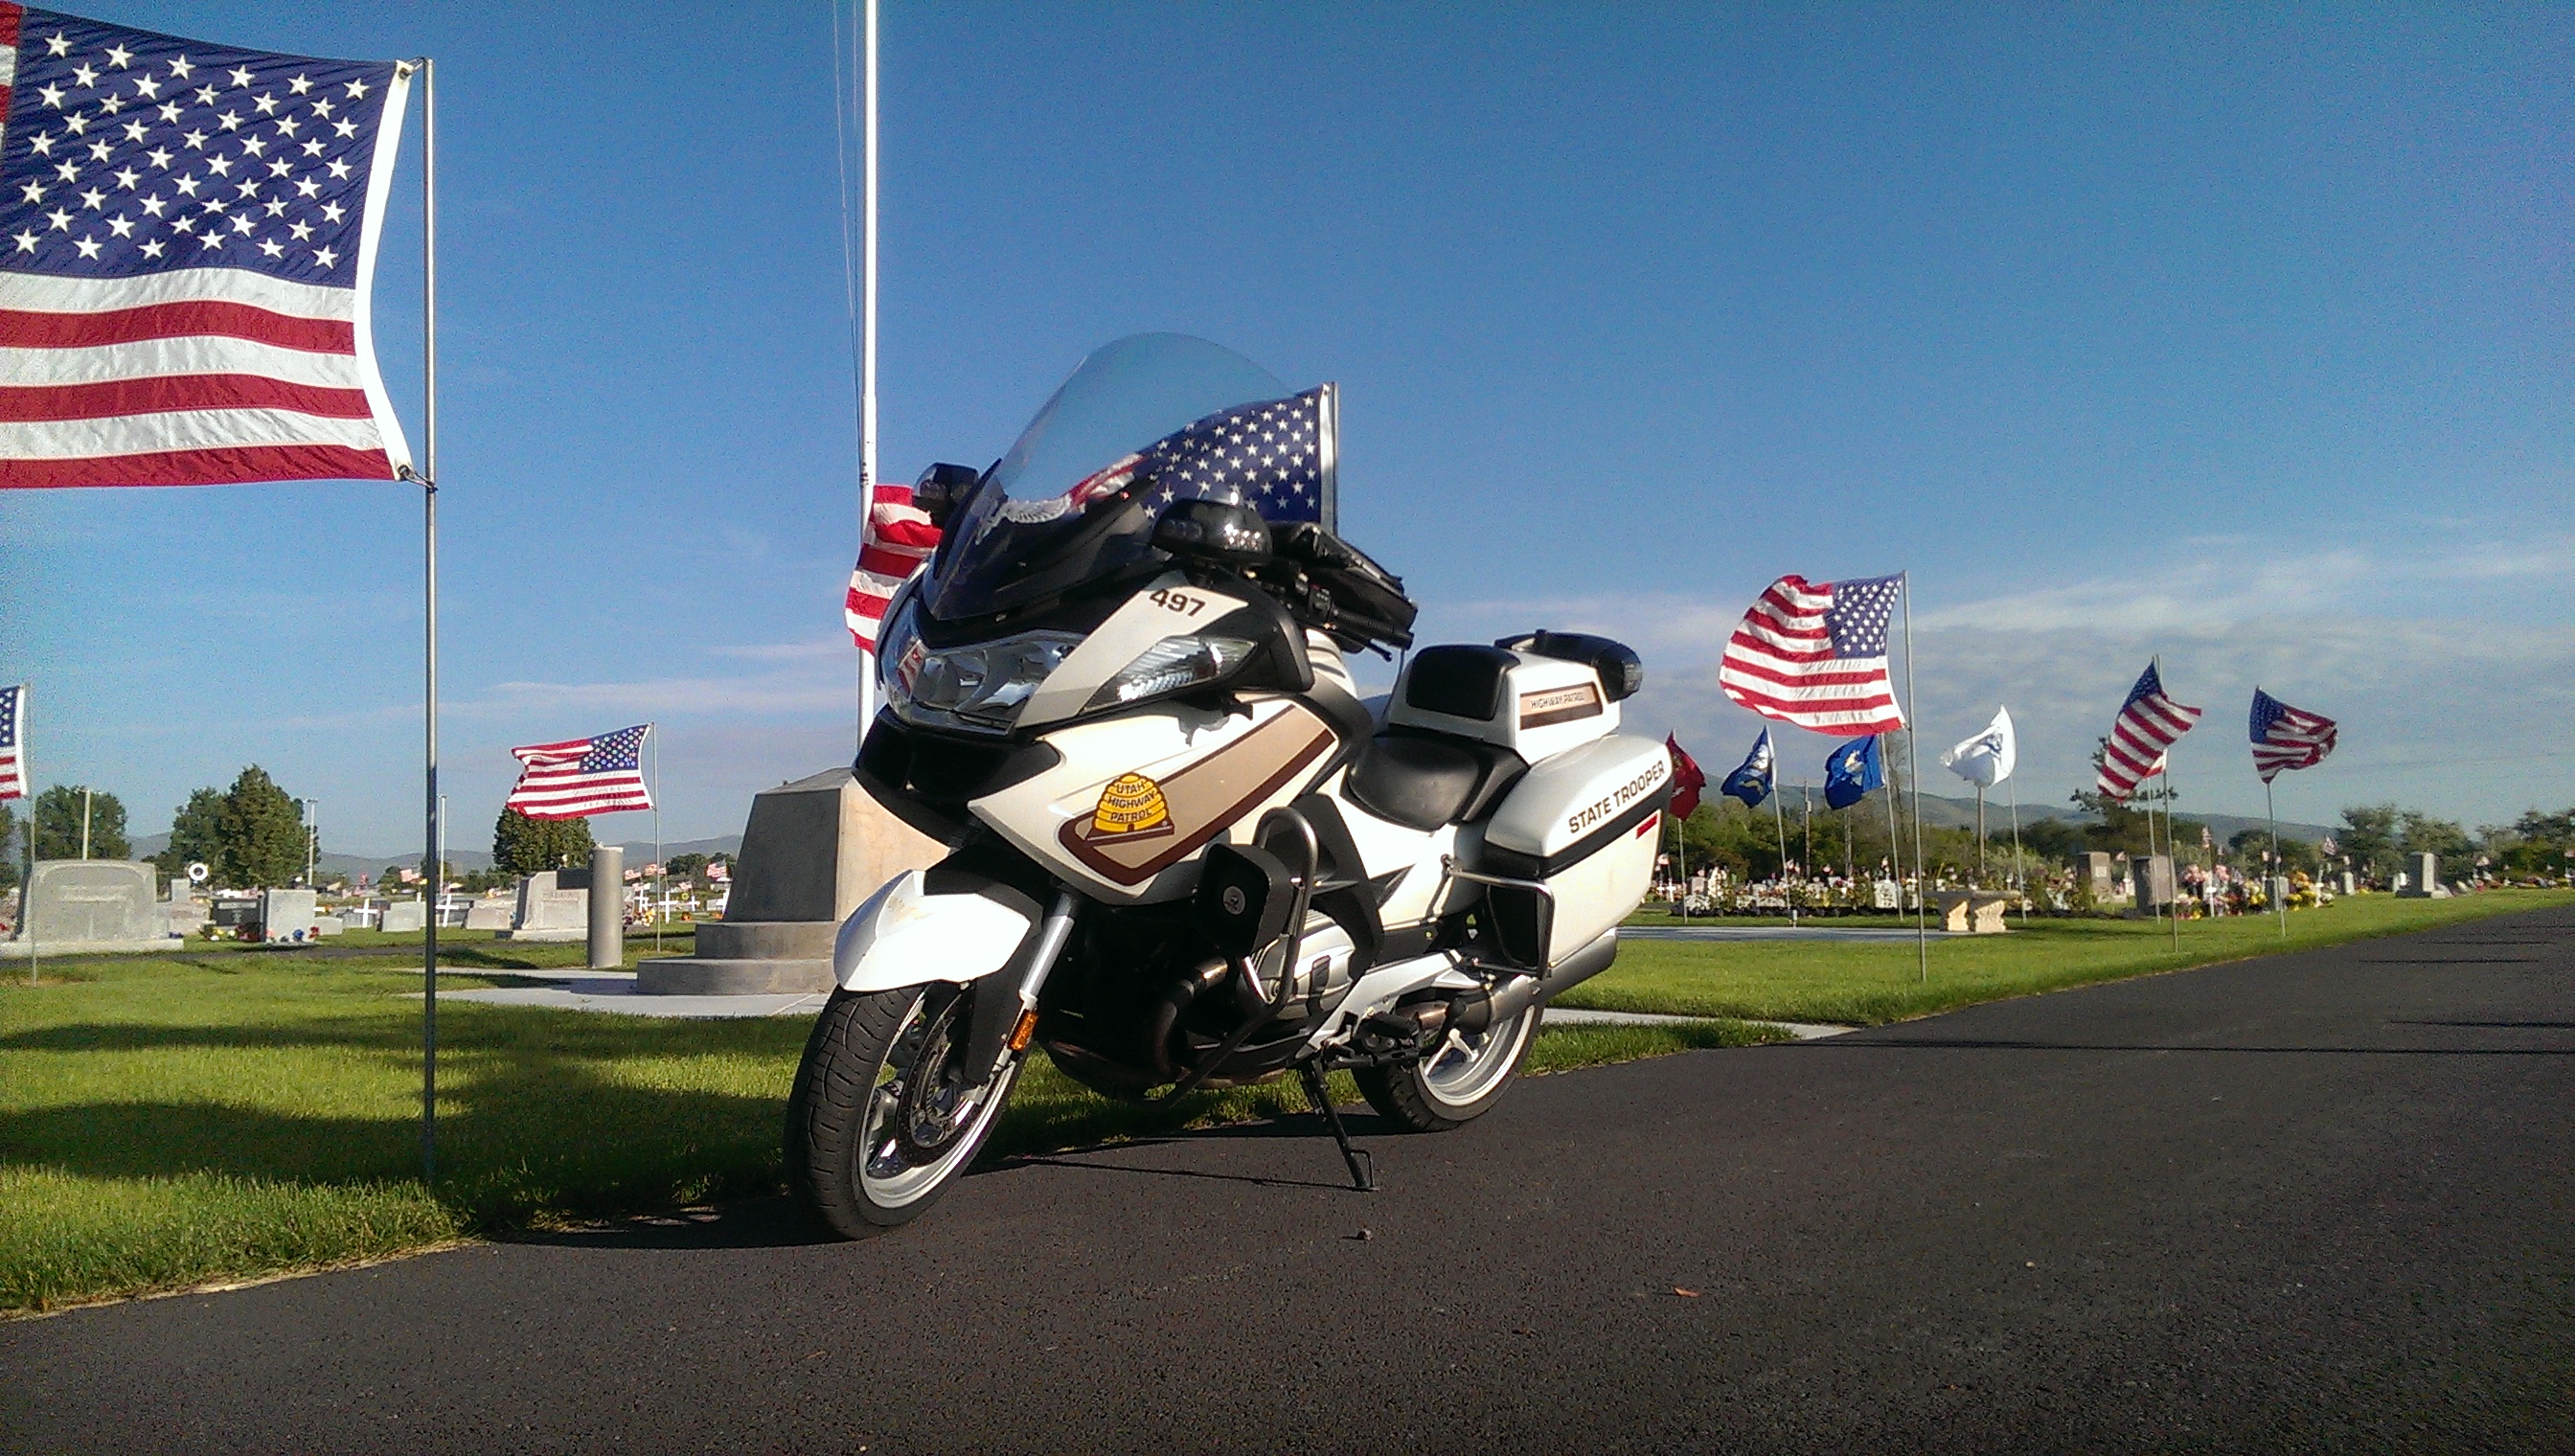 UHP motorcycle parked near flags on Memorial Day 2016